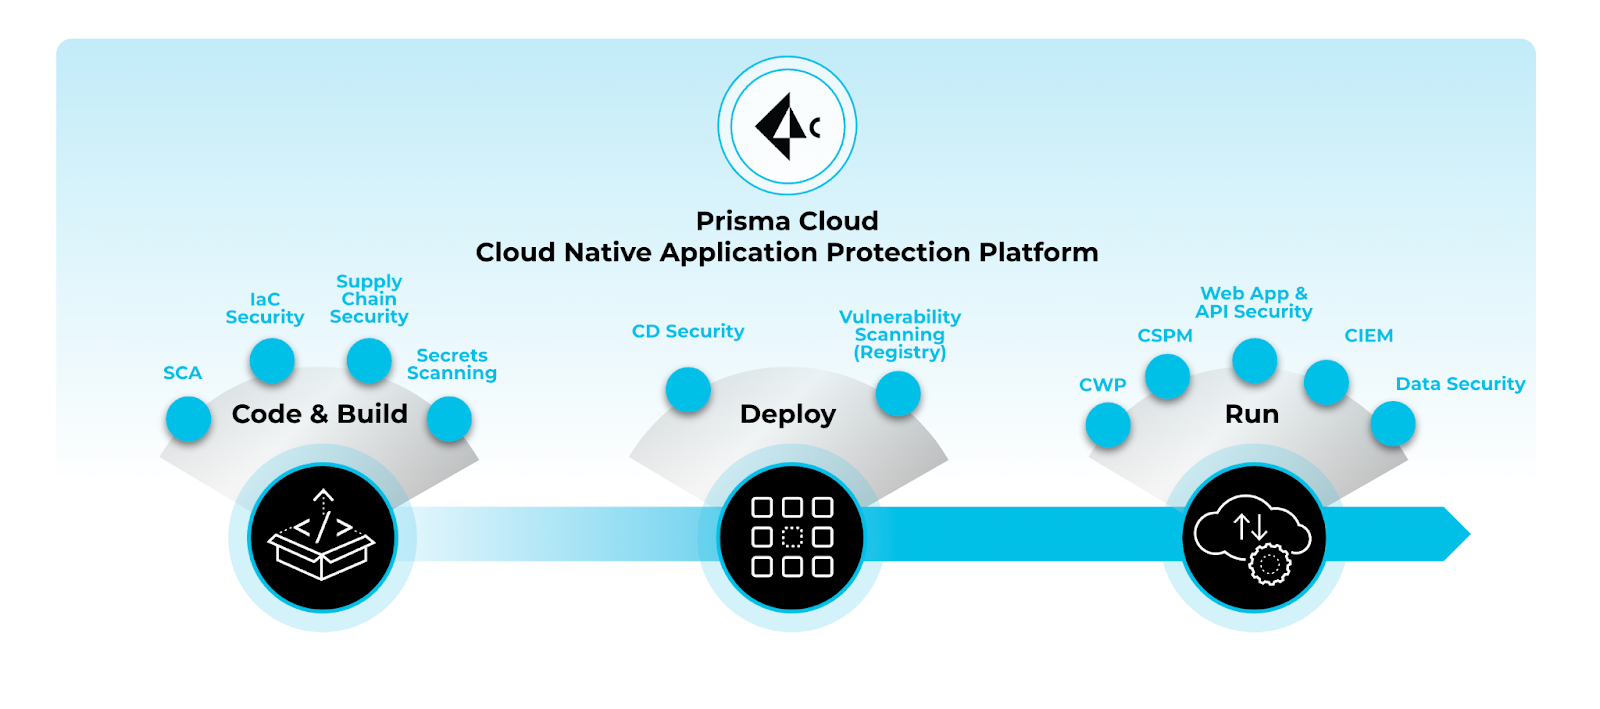 Image 2: Prisma Cloud secures applications throughout the application lifecycle